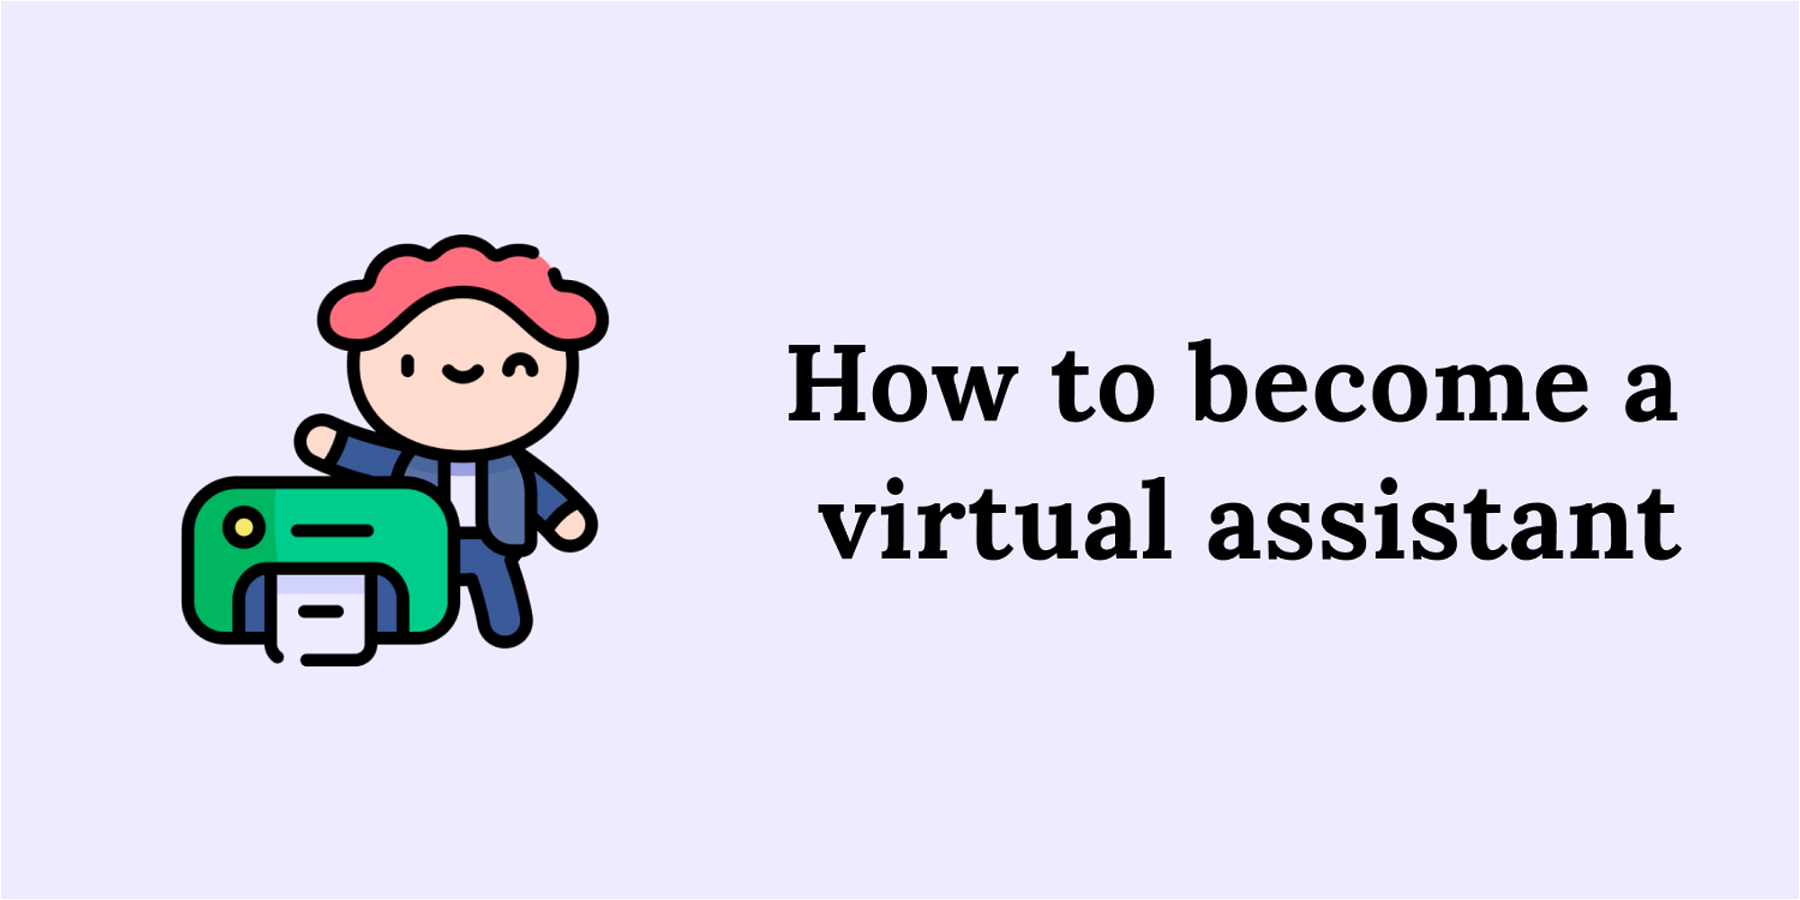 A freelancer’s guide to becoming a successful virtual assistant